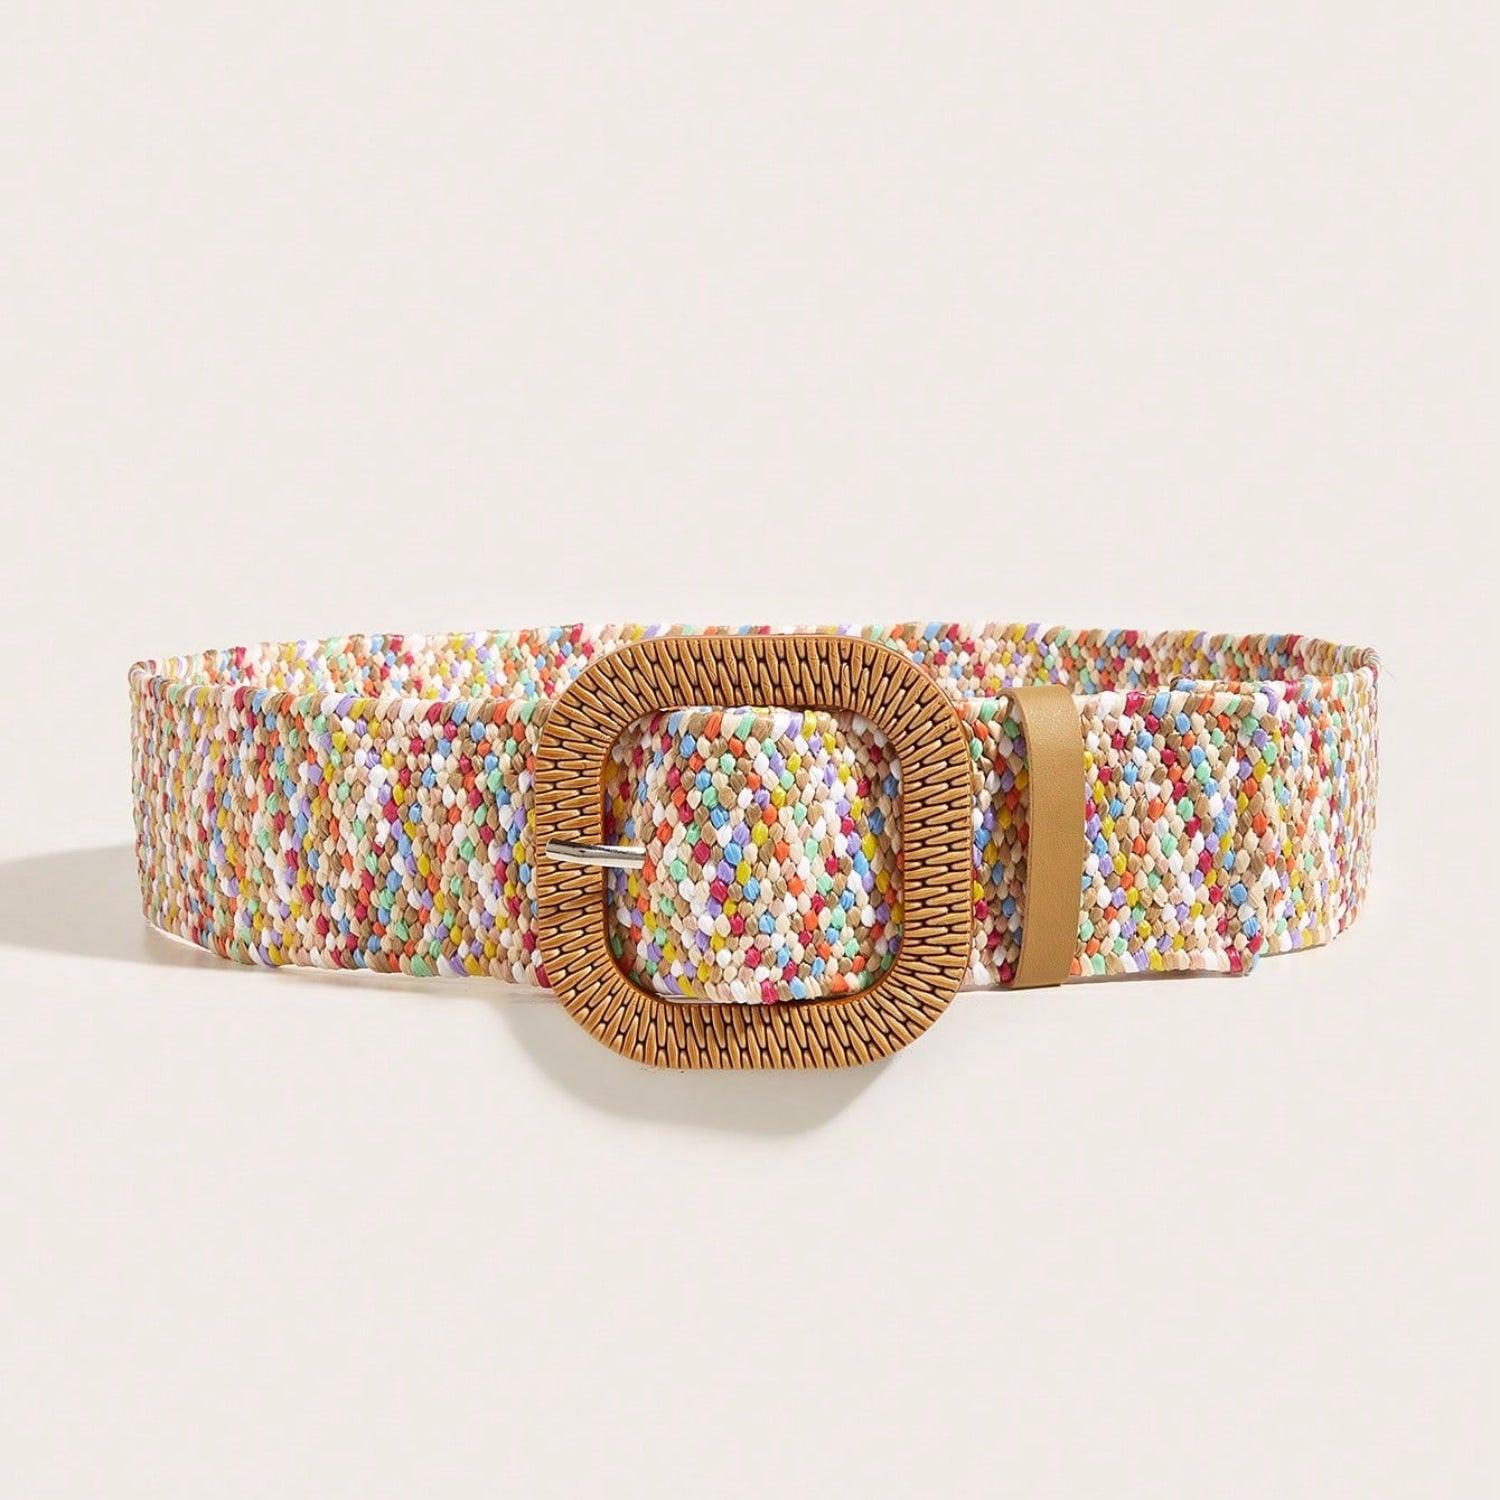 a multicolored belt with a metal buckle